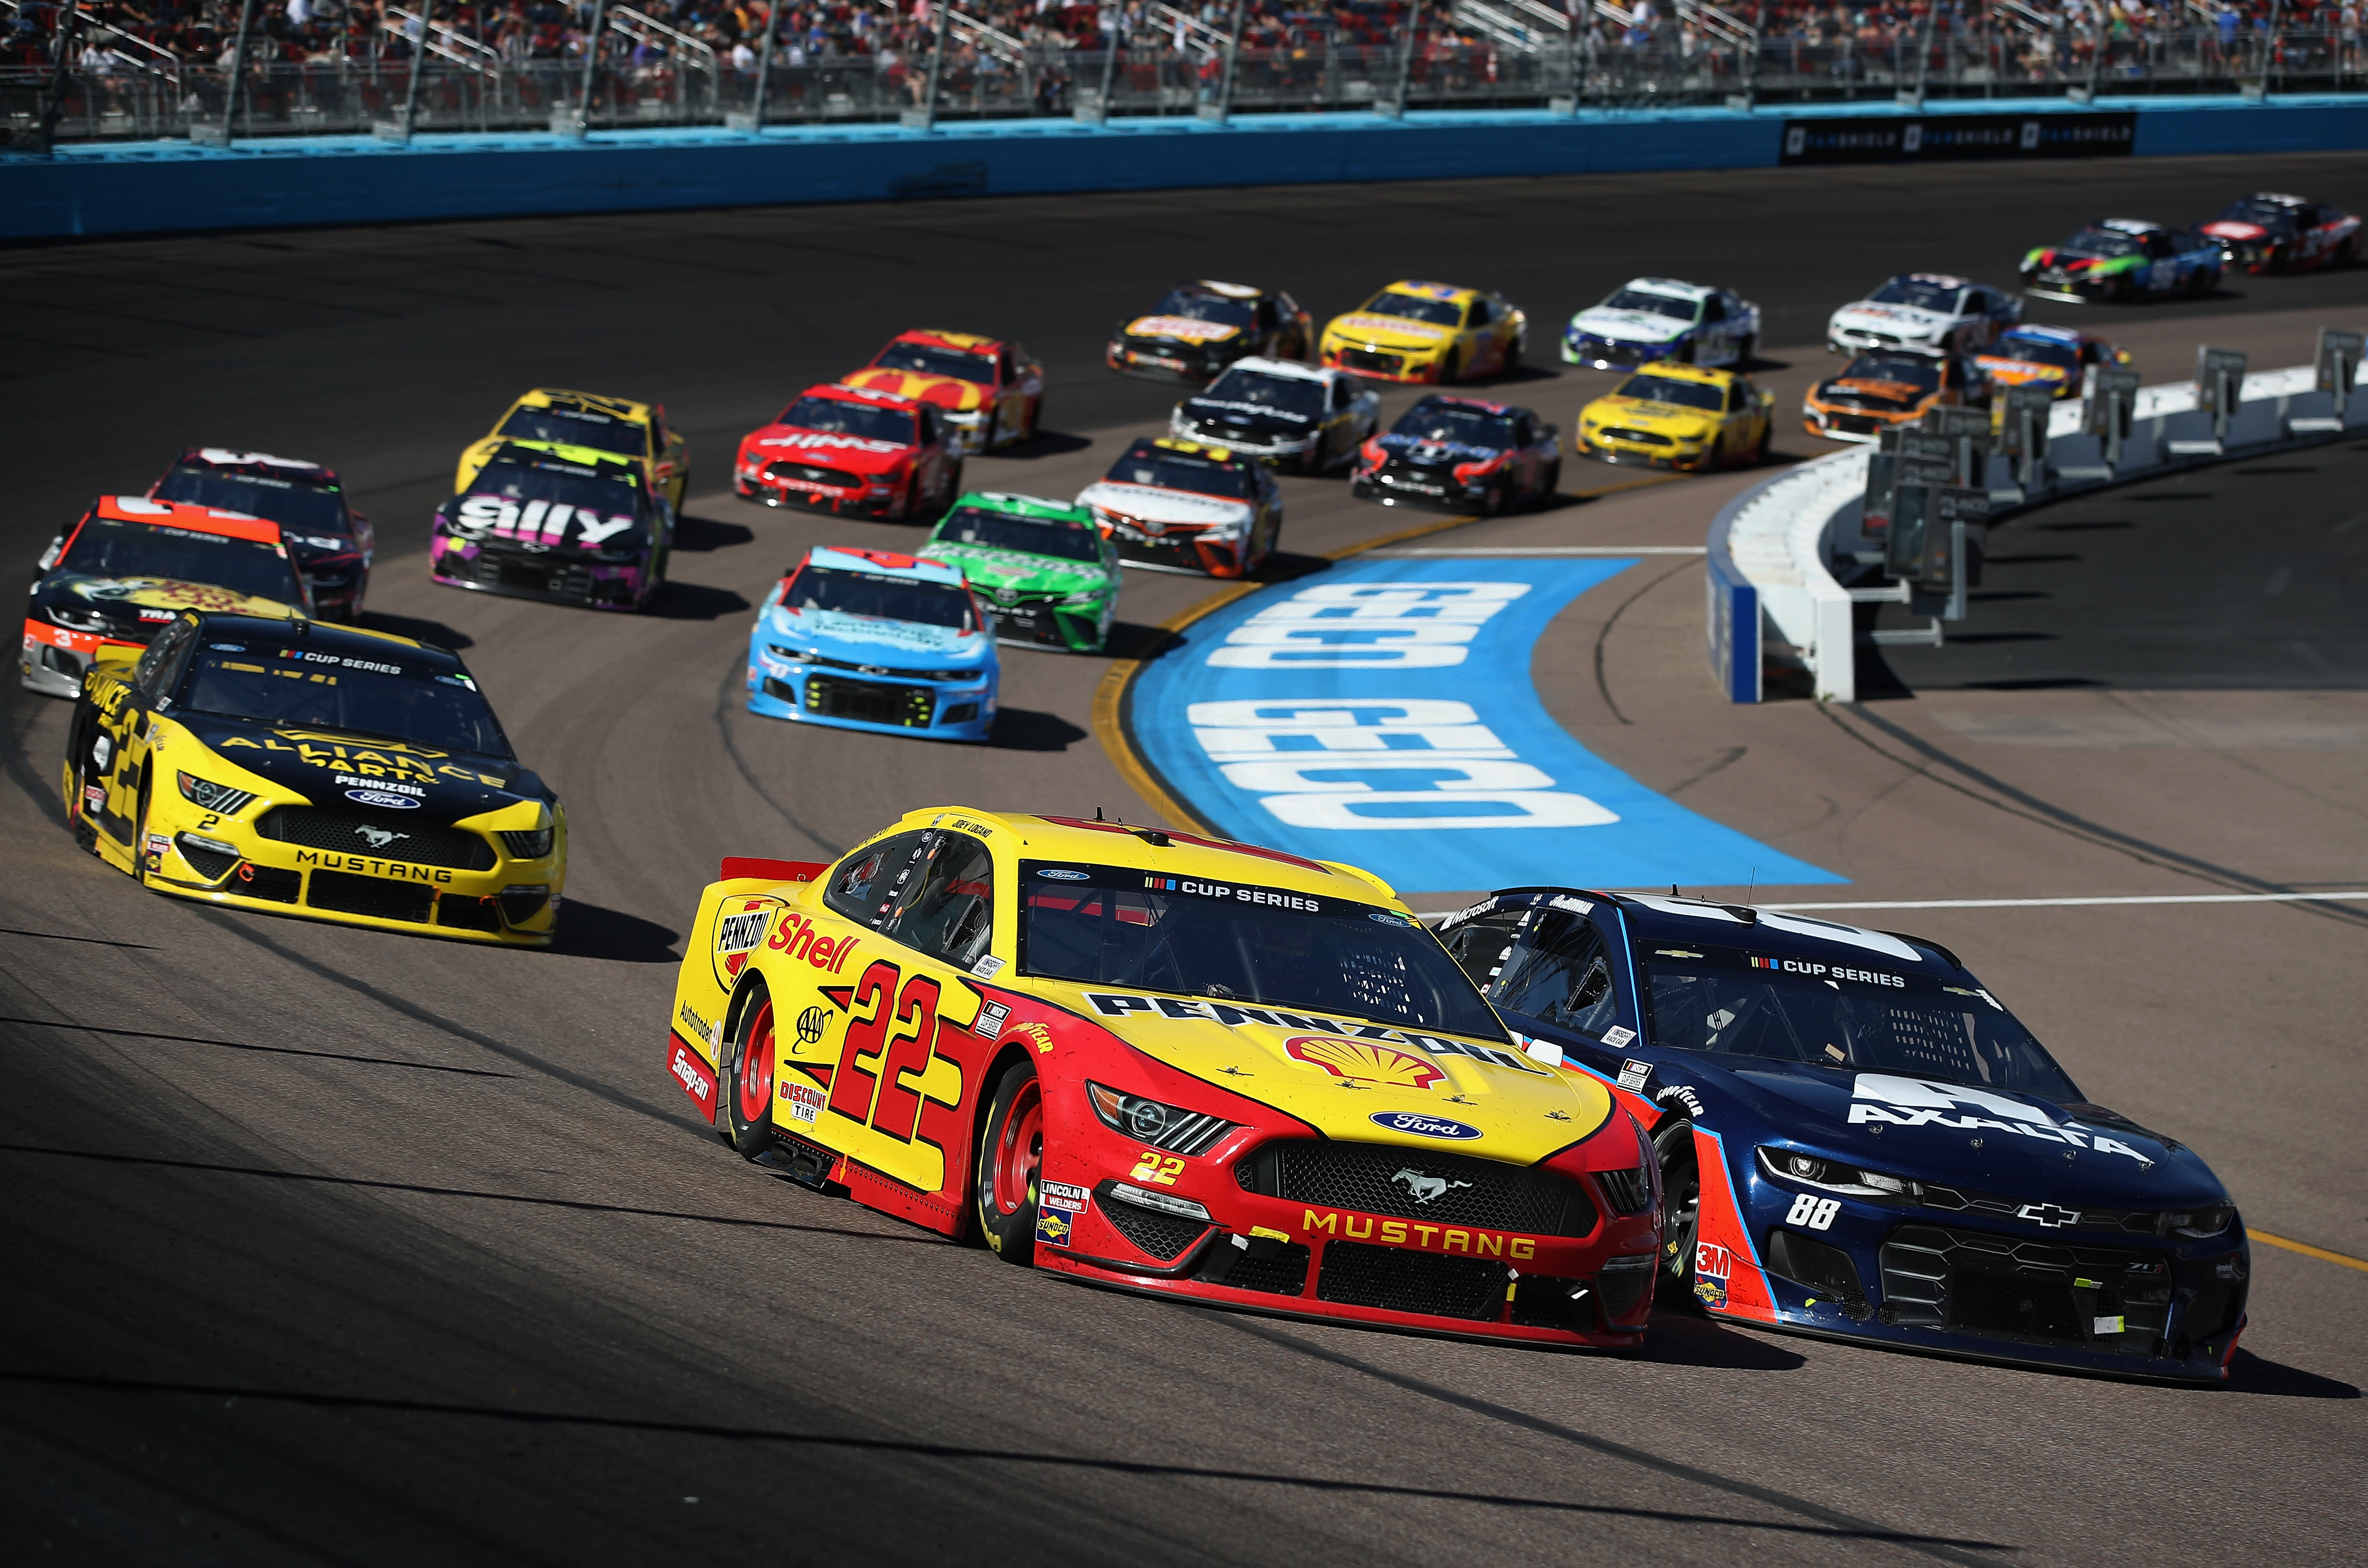 Facebook Venue app lets you stream sports — starting with NASCAR